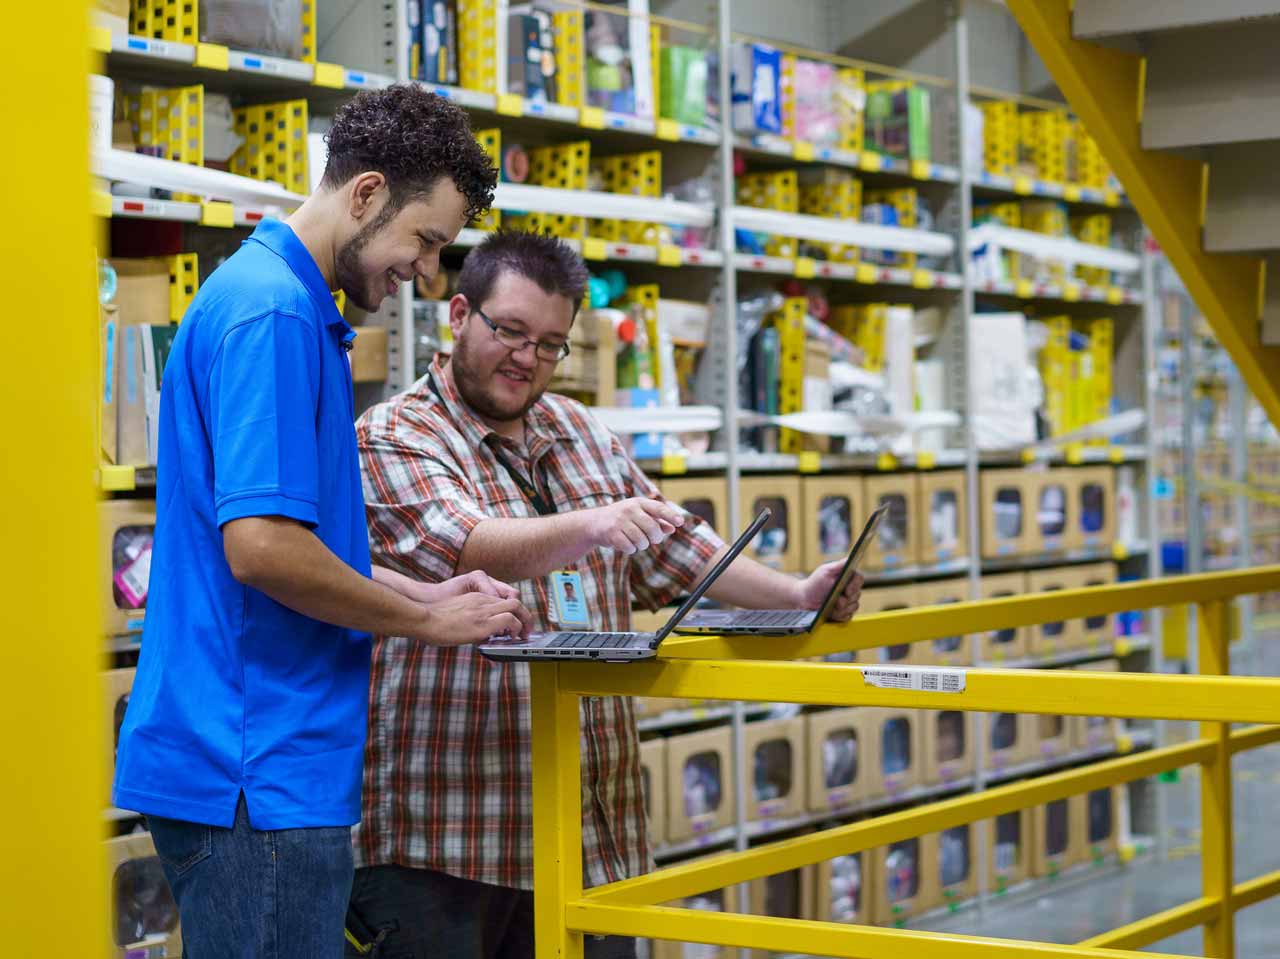 Two smiling Amazon employees stand with their laptops balanced on a safety railing on the production floor of an Amazon fulfillment center, with shelves of product in the background. One Amazon employee points to the other's laptop screen, teaching his colleague something.